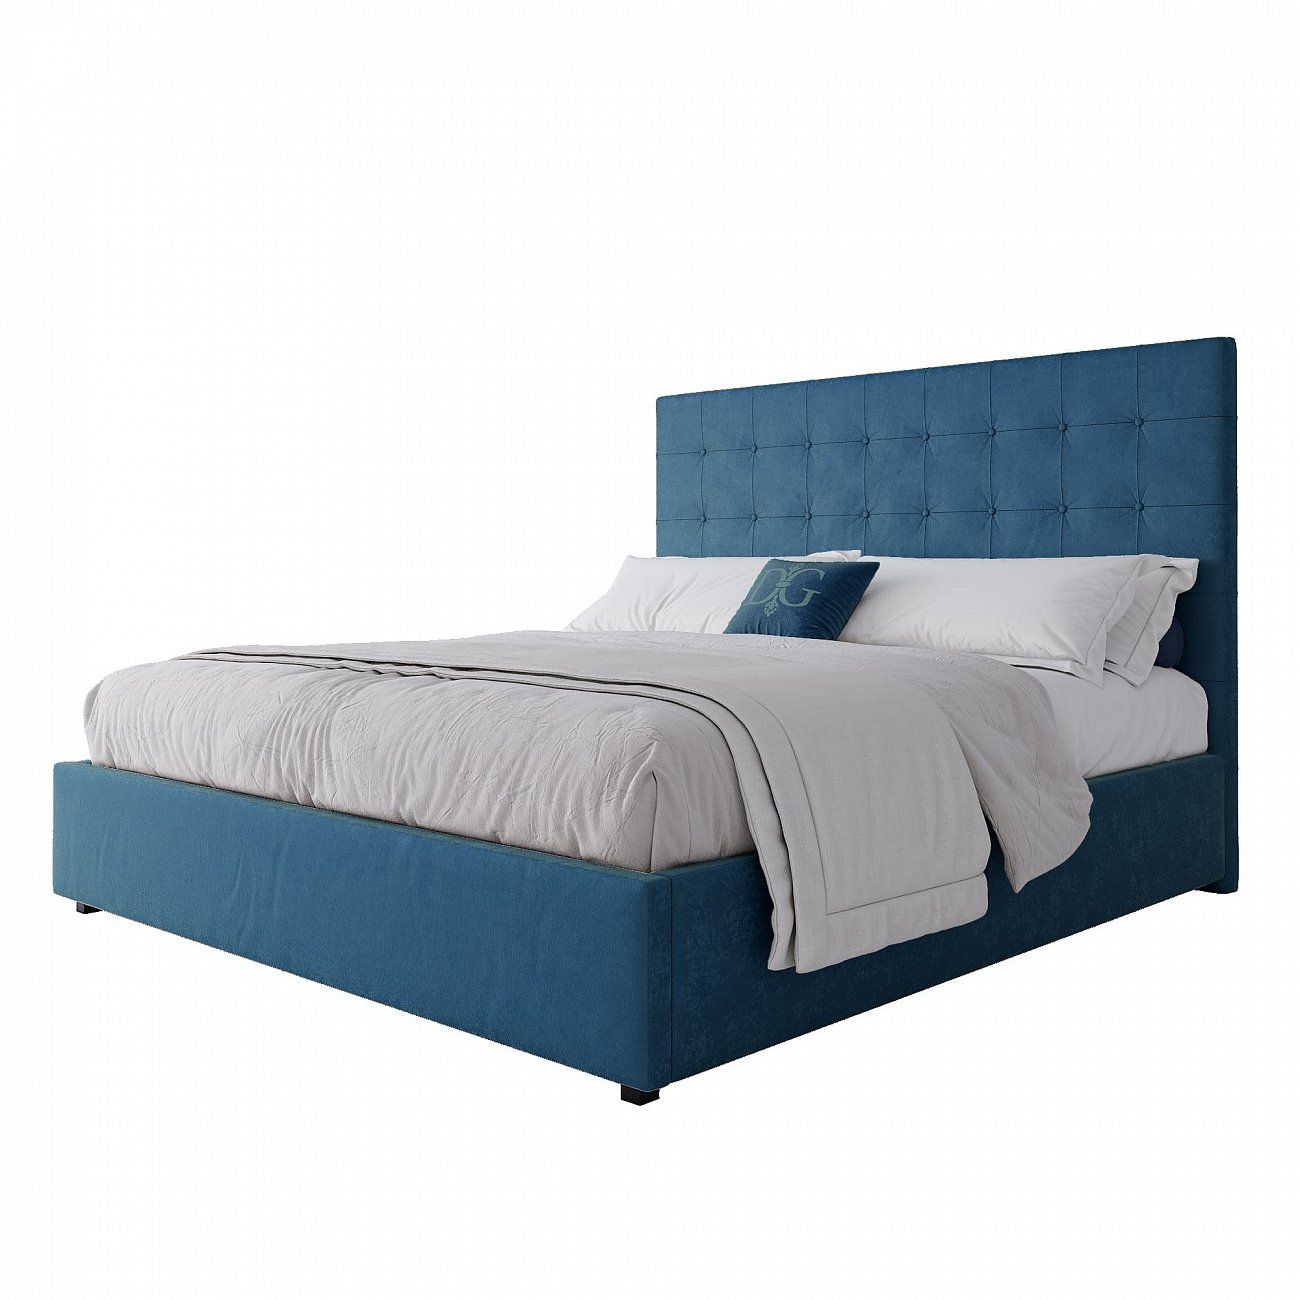 Double bed with upholstered headboard 180x200 cm Sea wave Royal Black